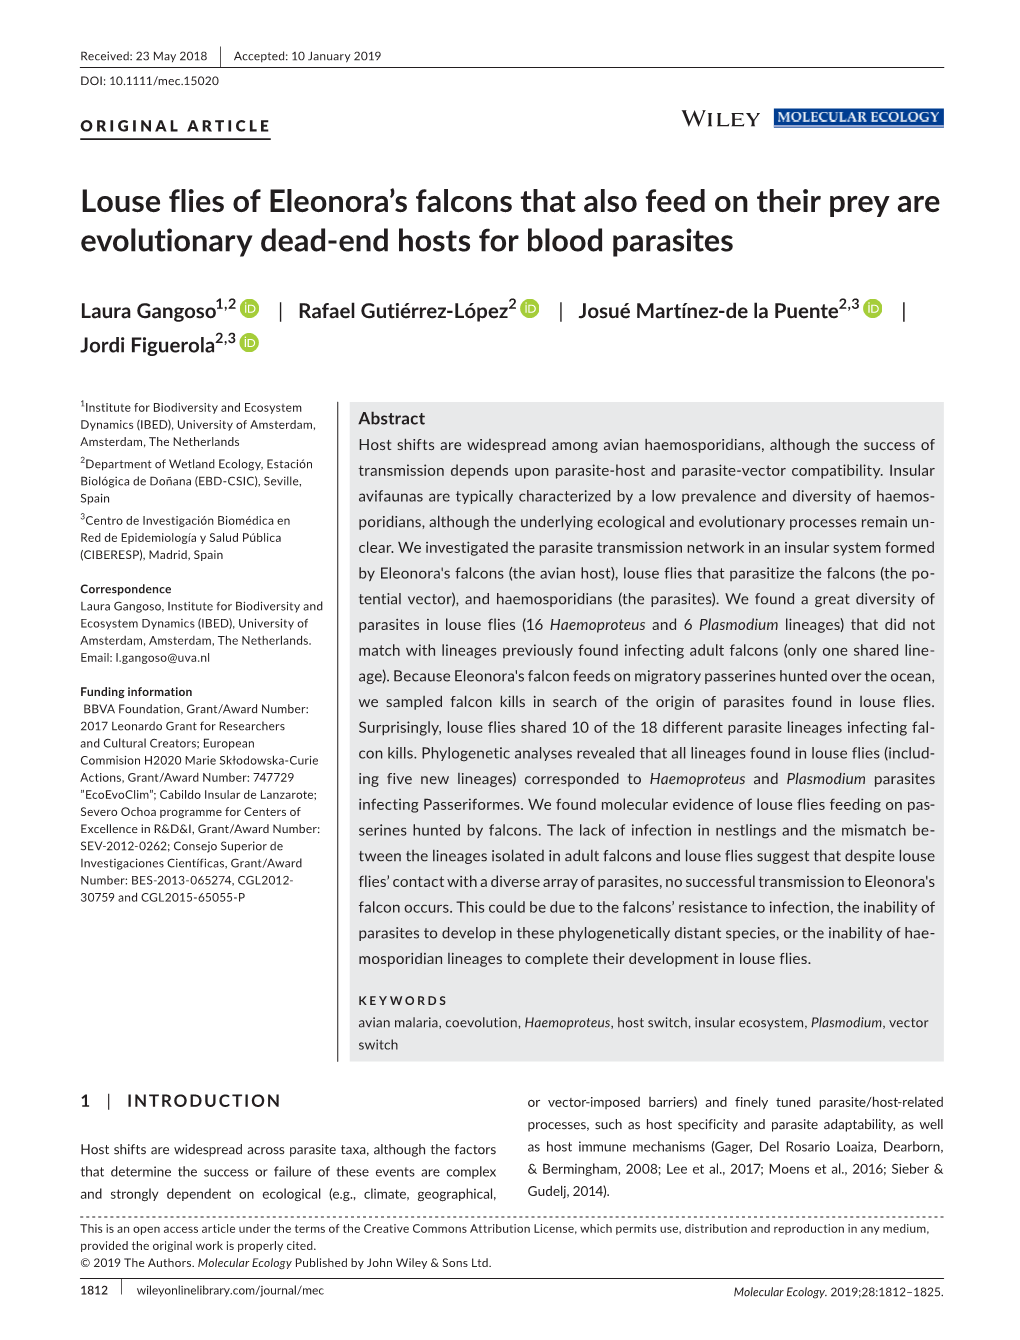 Louse Flies of Eleonora's Falcons That Also Feed on Their Prey Are Evolutionary Dead‐End Hosts for Blood Parasites